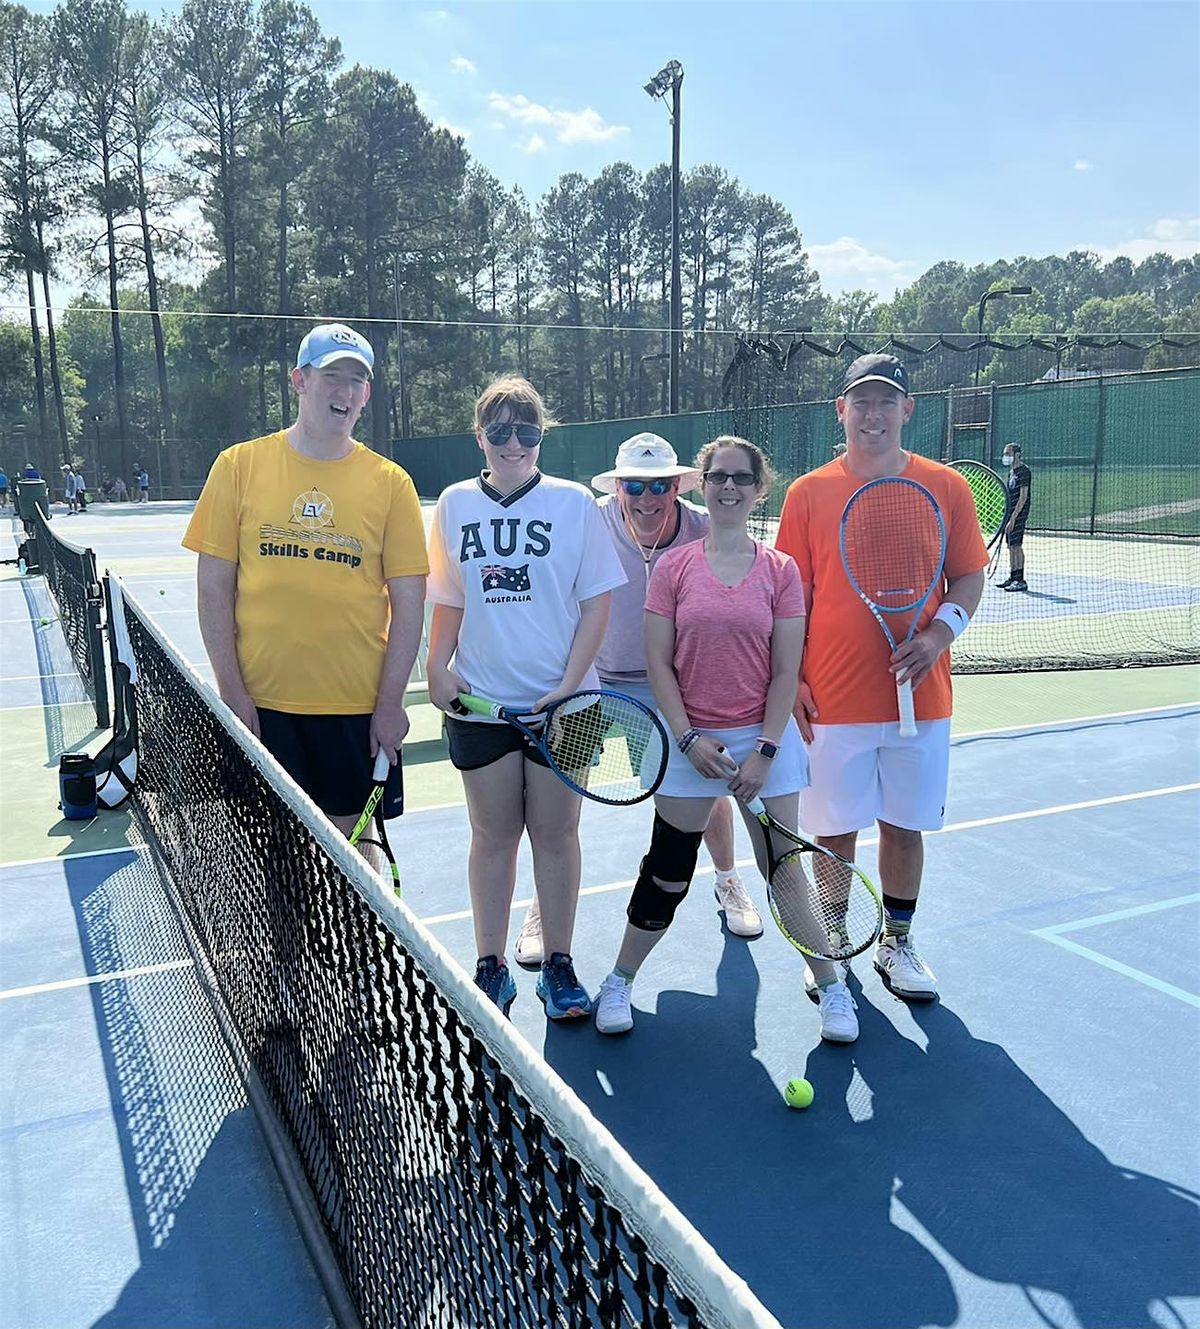 Abilities Tennis Summer Clinics in Chapel Hill - Athletes and Volunteers